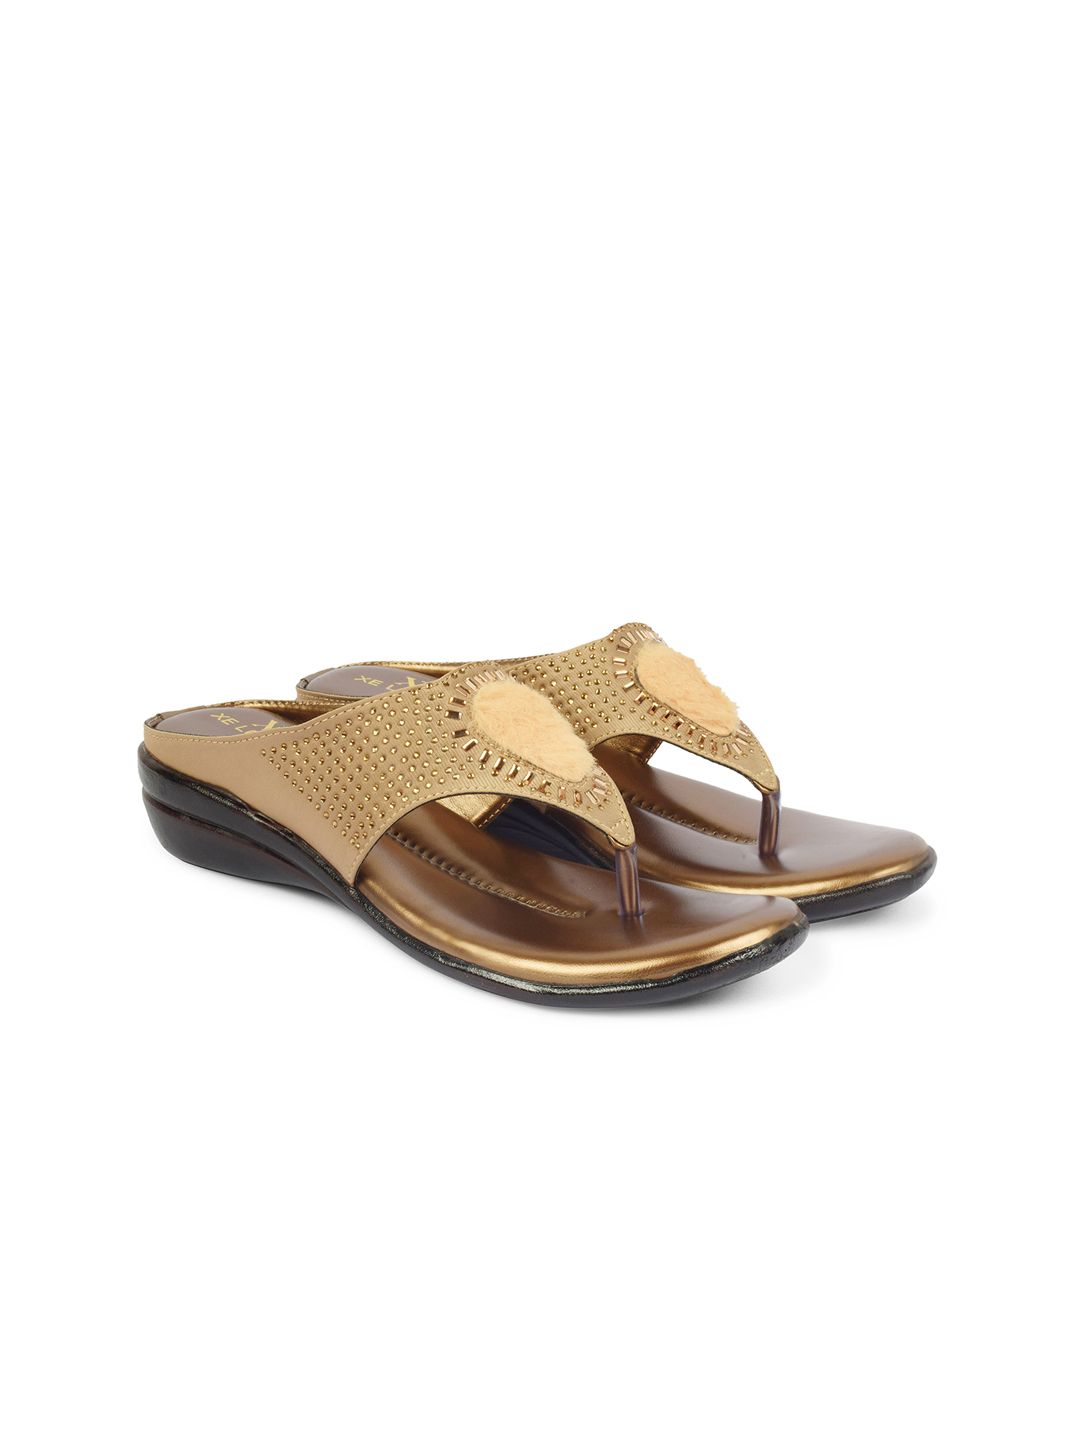 XE LOOKS Women Copper-Toned Embellished T-Strap Flats with Laser Cuts Price in India